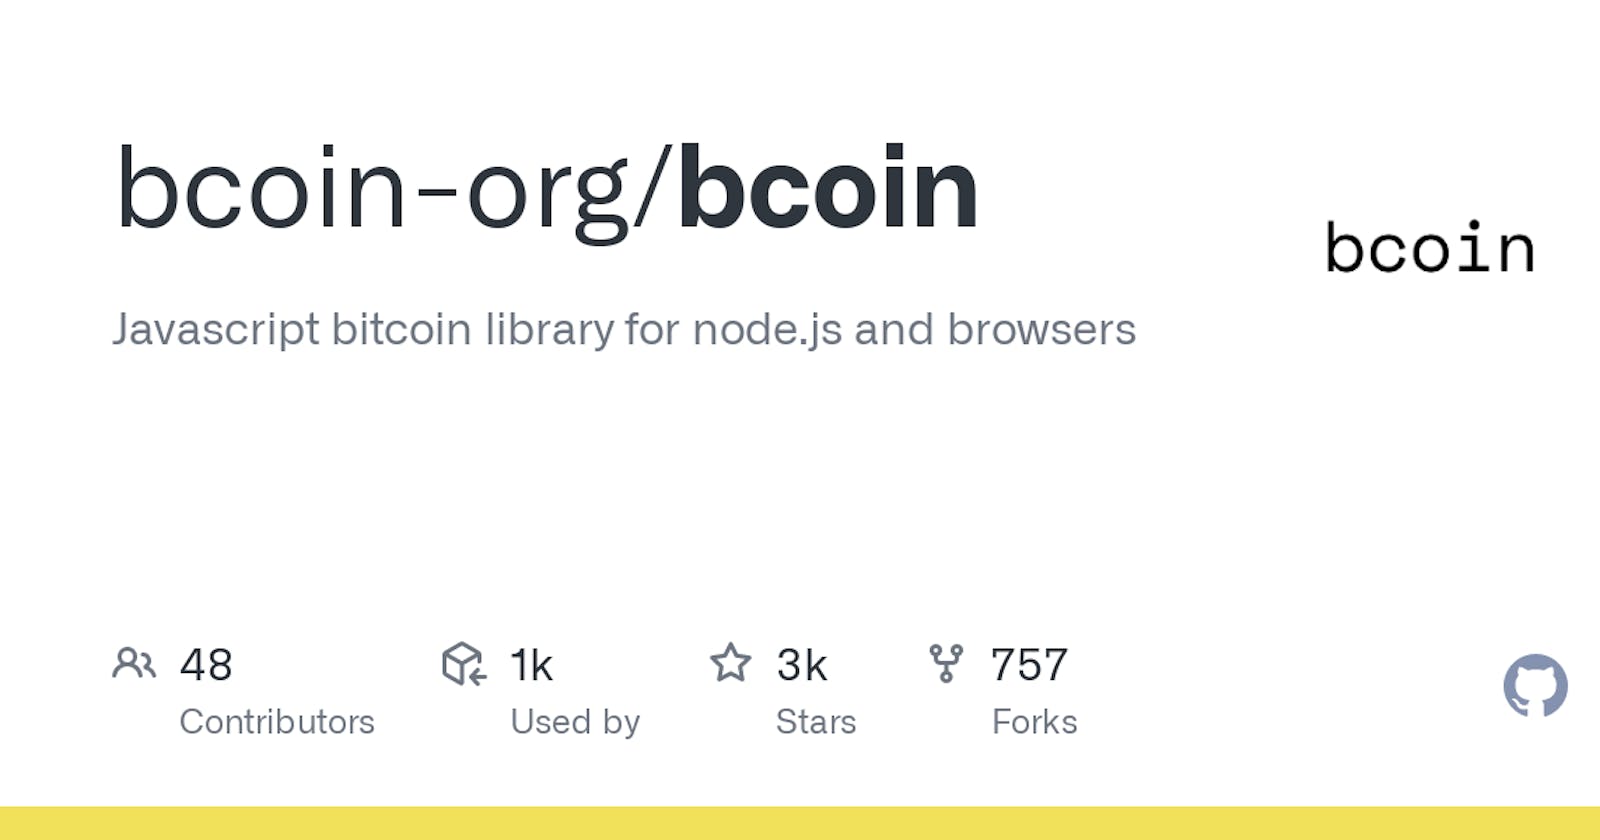 How to start contributing to Bcoin